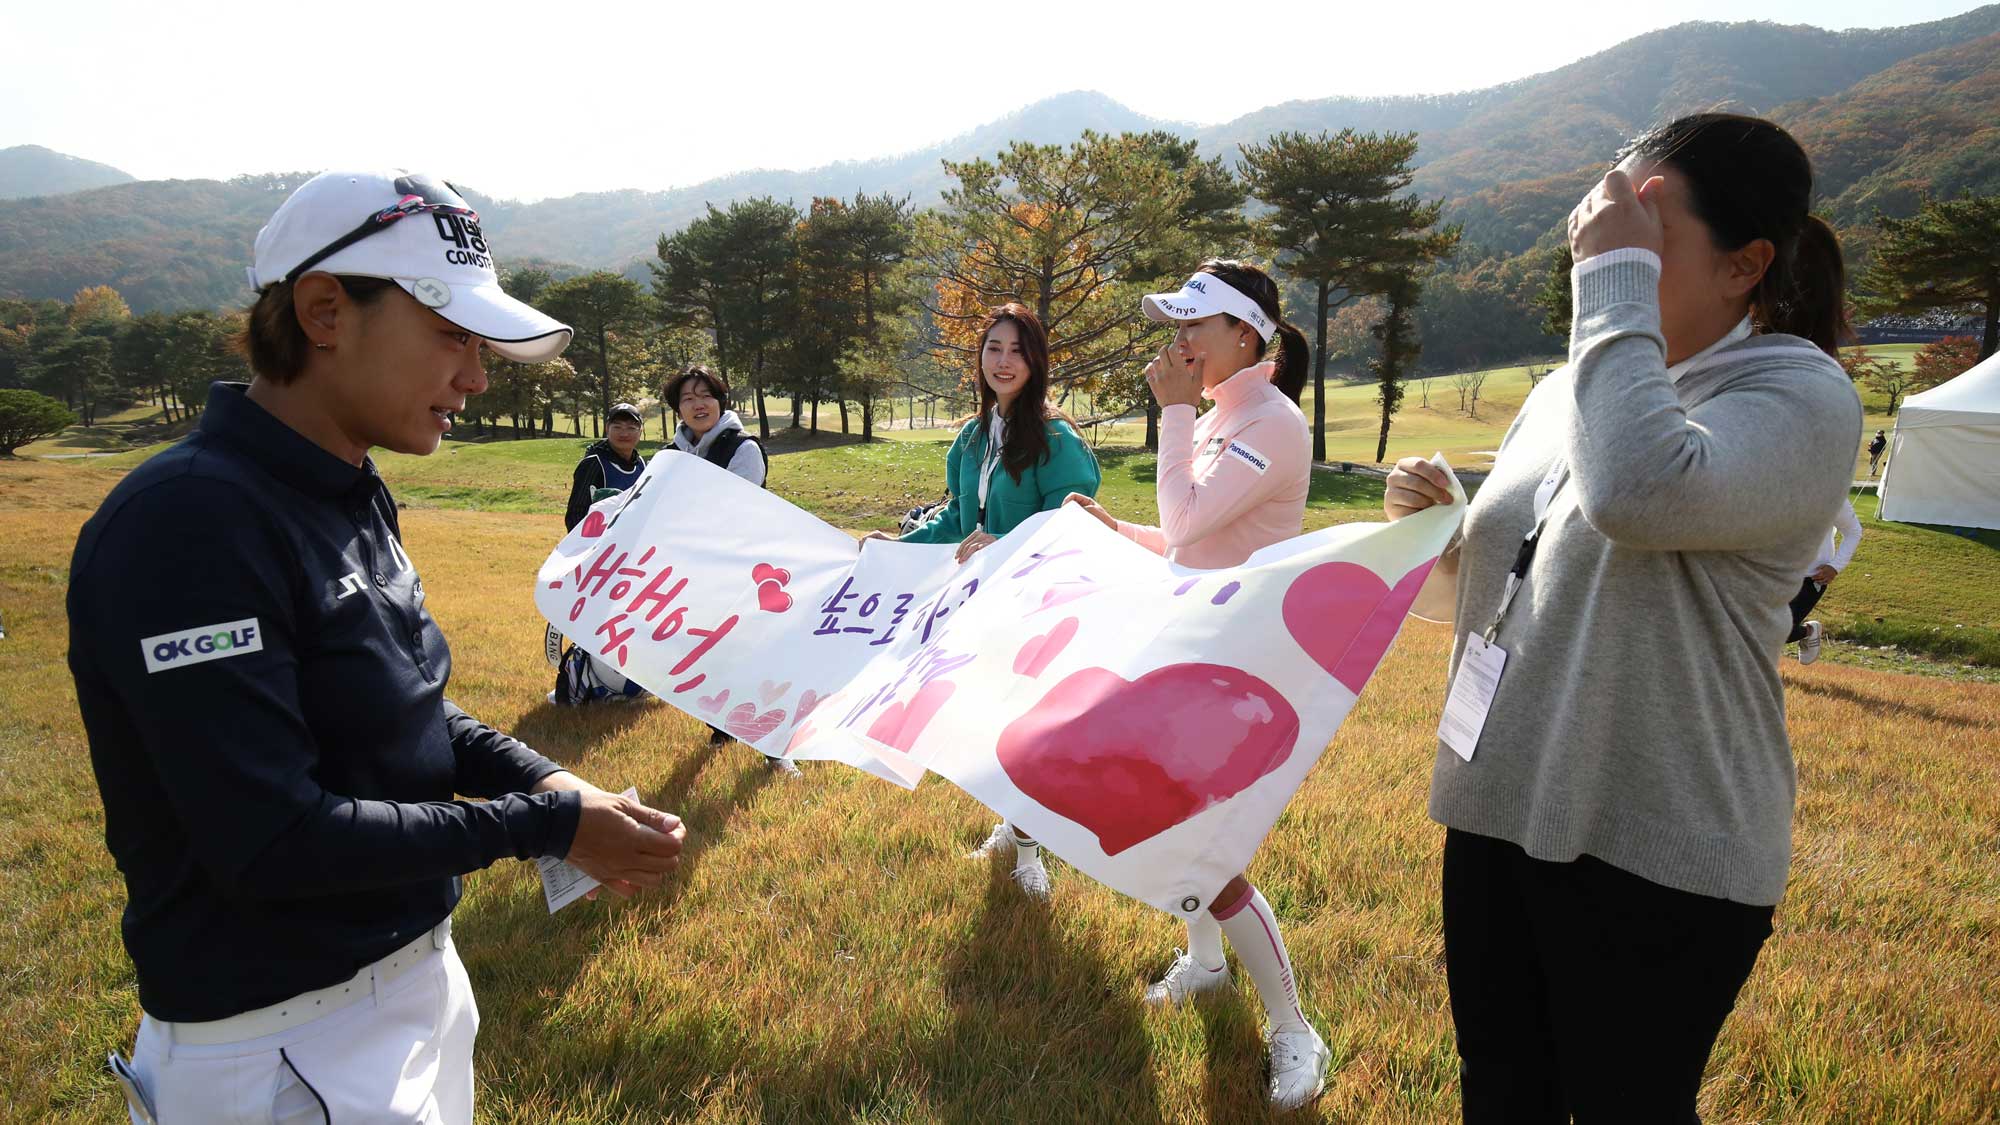 Na-yeon Choi (1st L) of South Korea approaches to Inbee Park (1st R) of South Korea, So-yeon Ryu (2nd R) of South Korea and former player Ha-neul Kim (3rd R) of South Korea holding a banner to appreciate Choi as she is retiring from LPGA tournaments near the 9th green during the final round of the BMW Ladies Championship